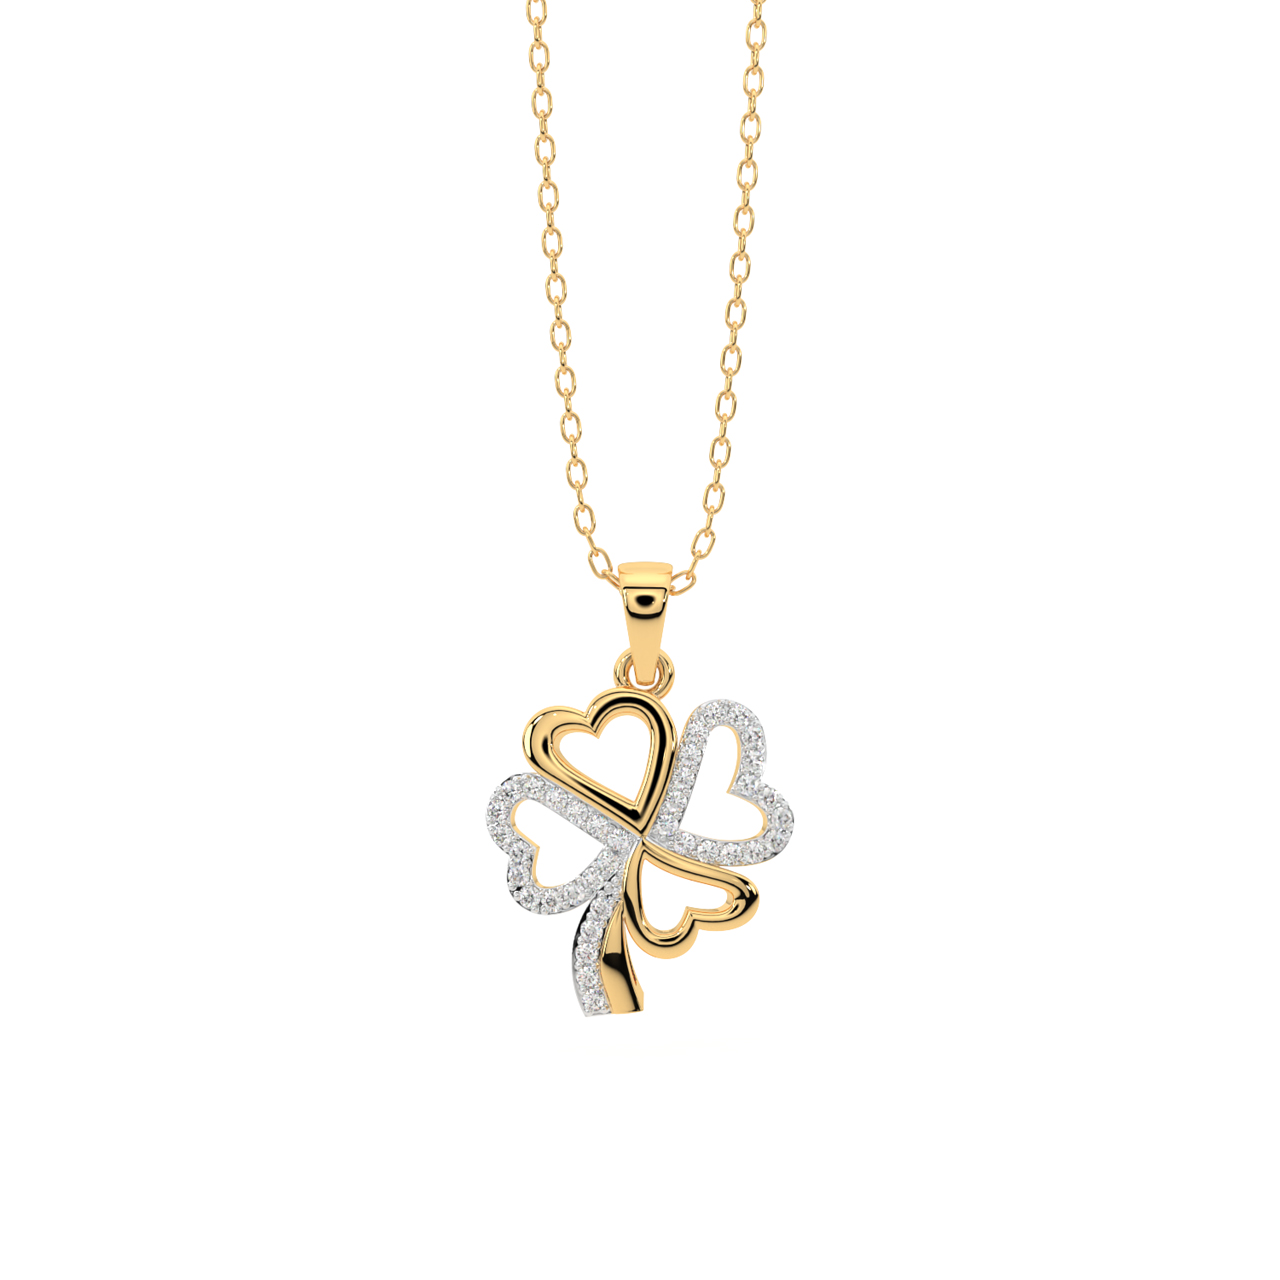 Flower Heart charm necklace – Wright & Teague